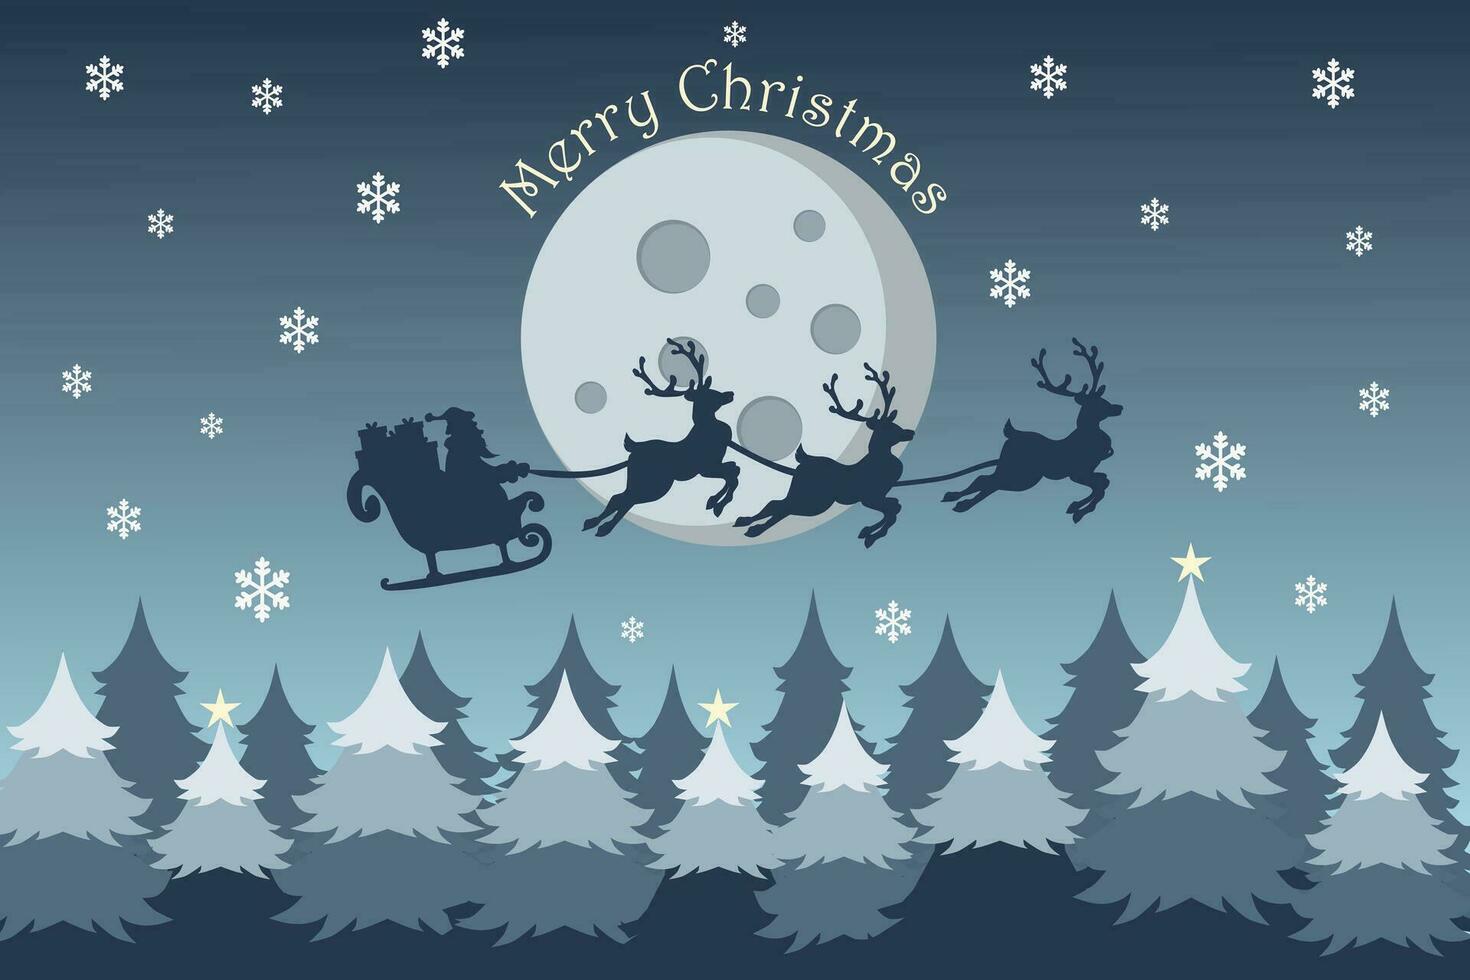 Merry Christmas background with Santa Claus flying on the sky in sleigh with reindeer at night with full moon, snow, and Christmas trees. vector illustration.